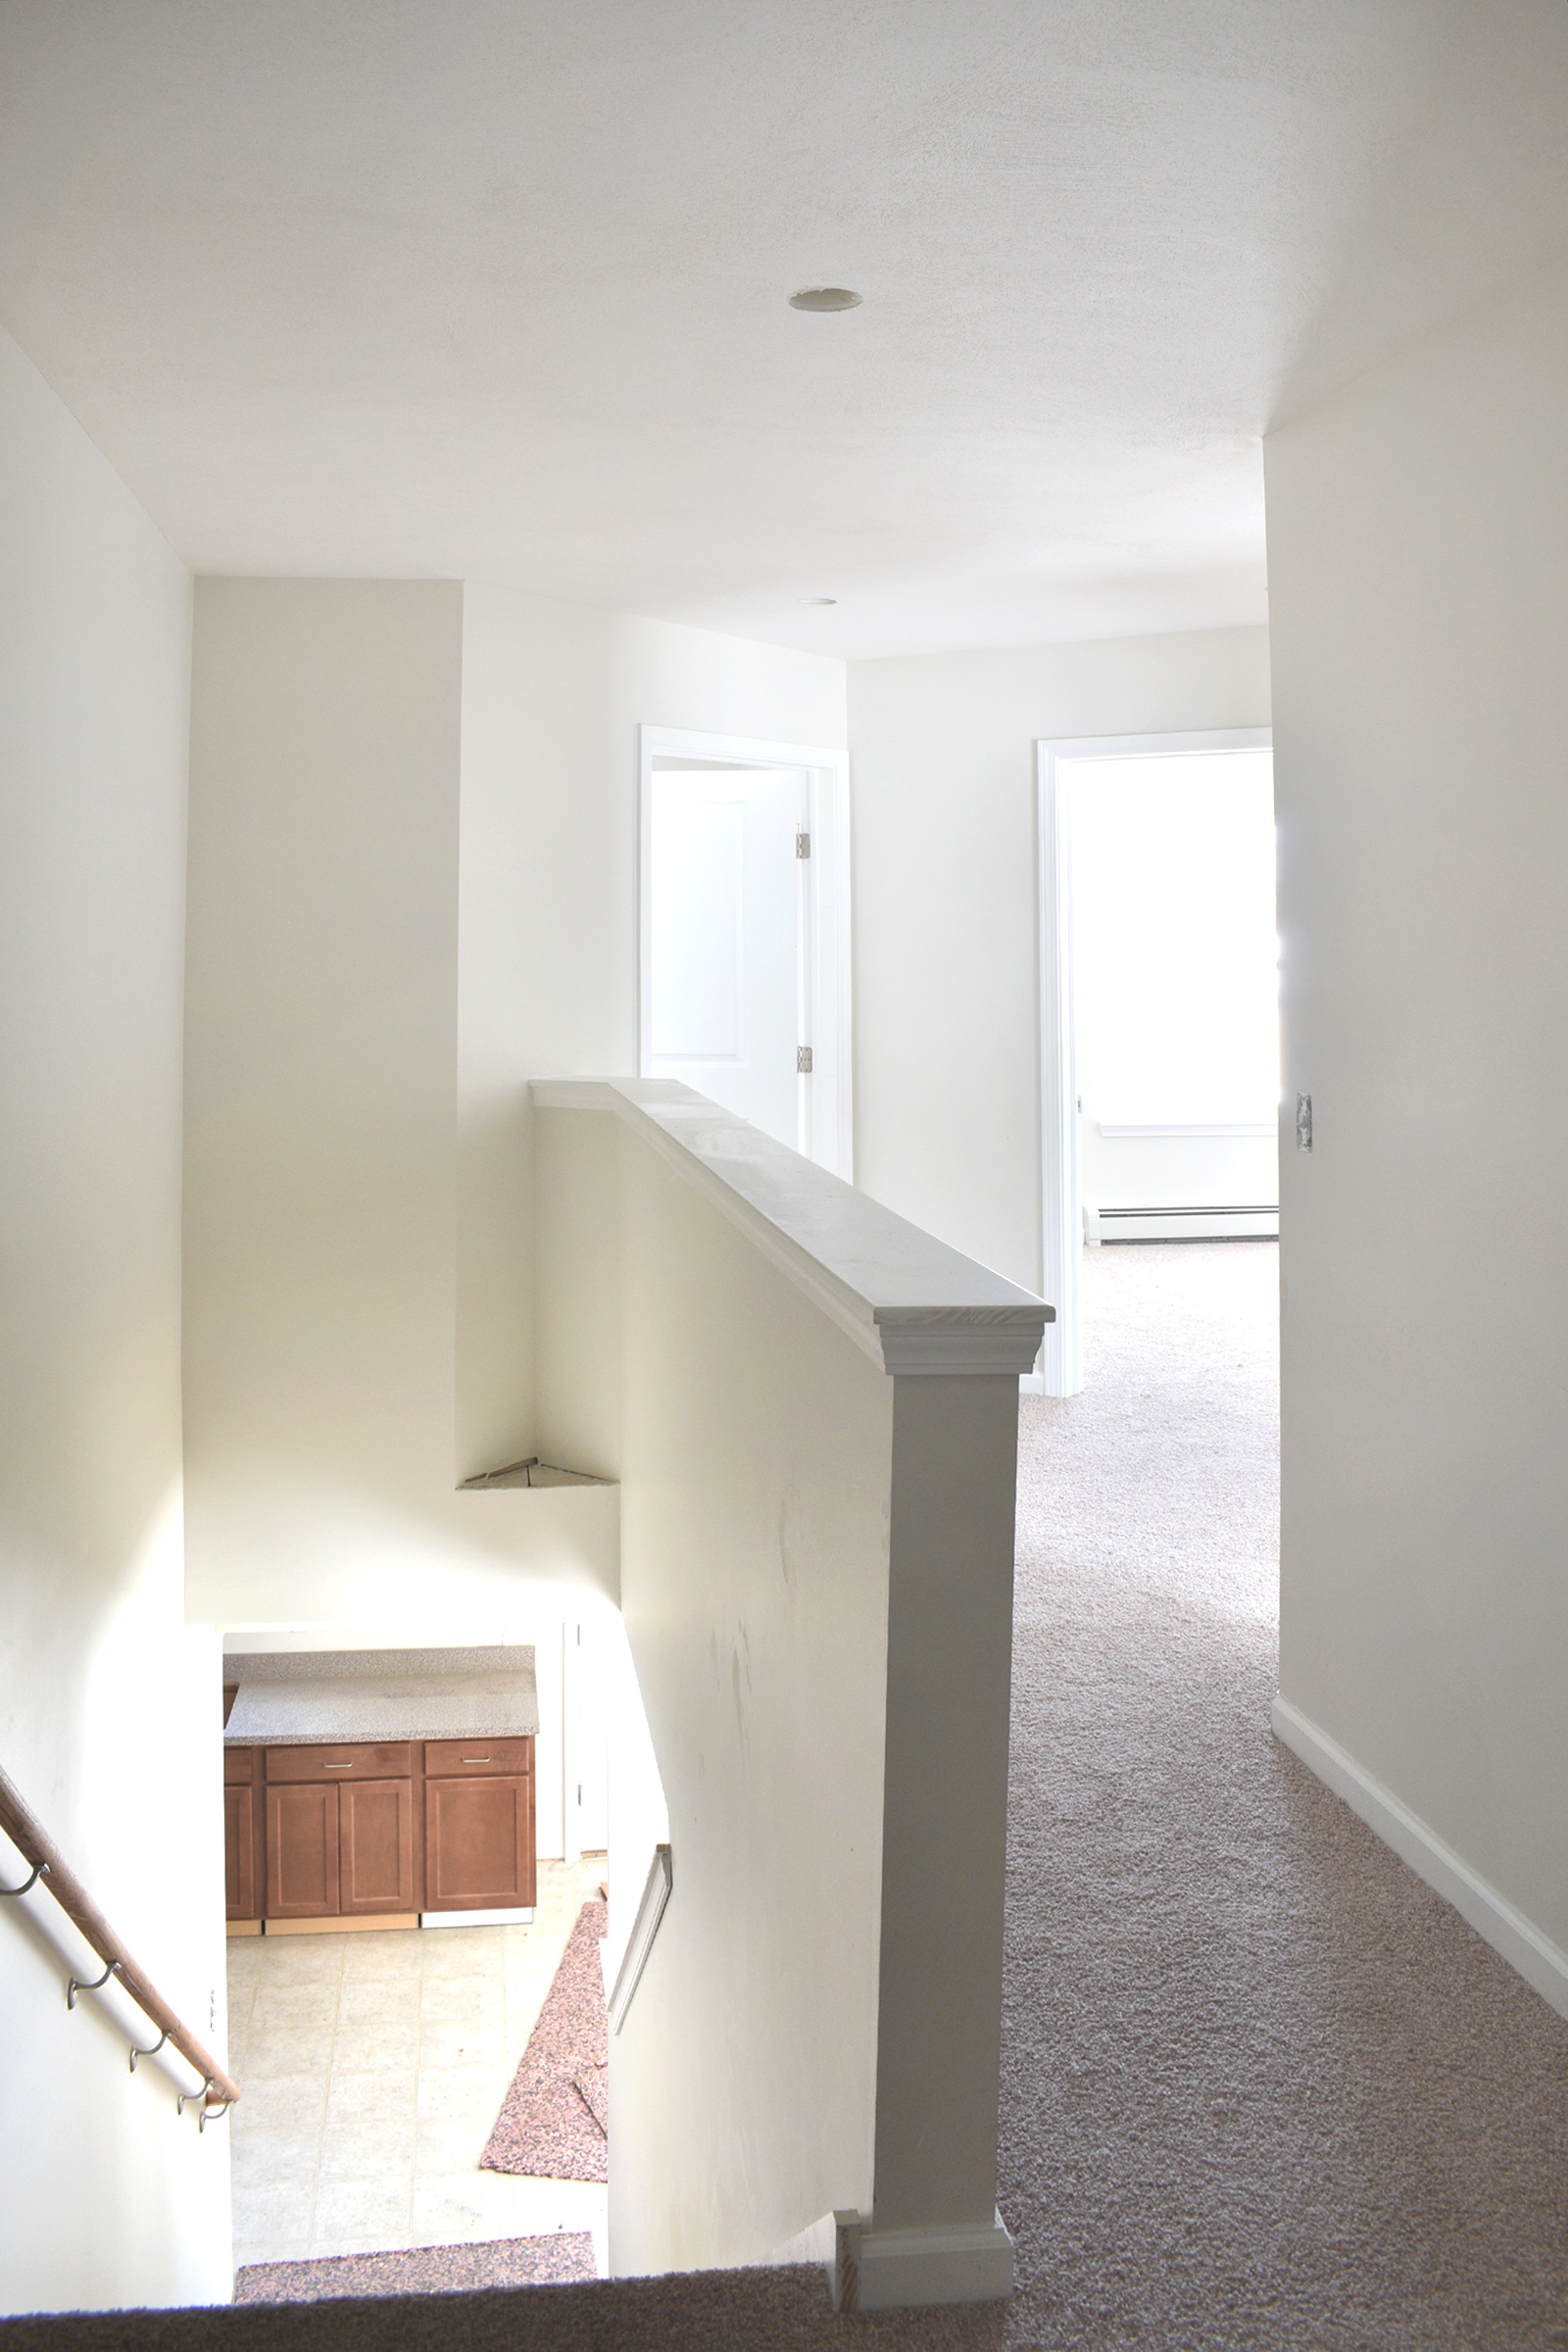 property management company client list syracuse ny upstairs hall and landing image of selkirk townhome